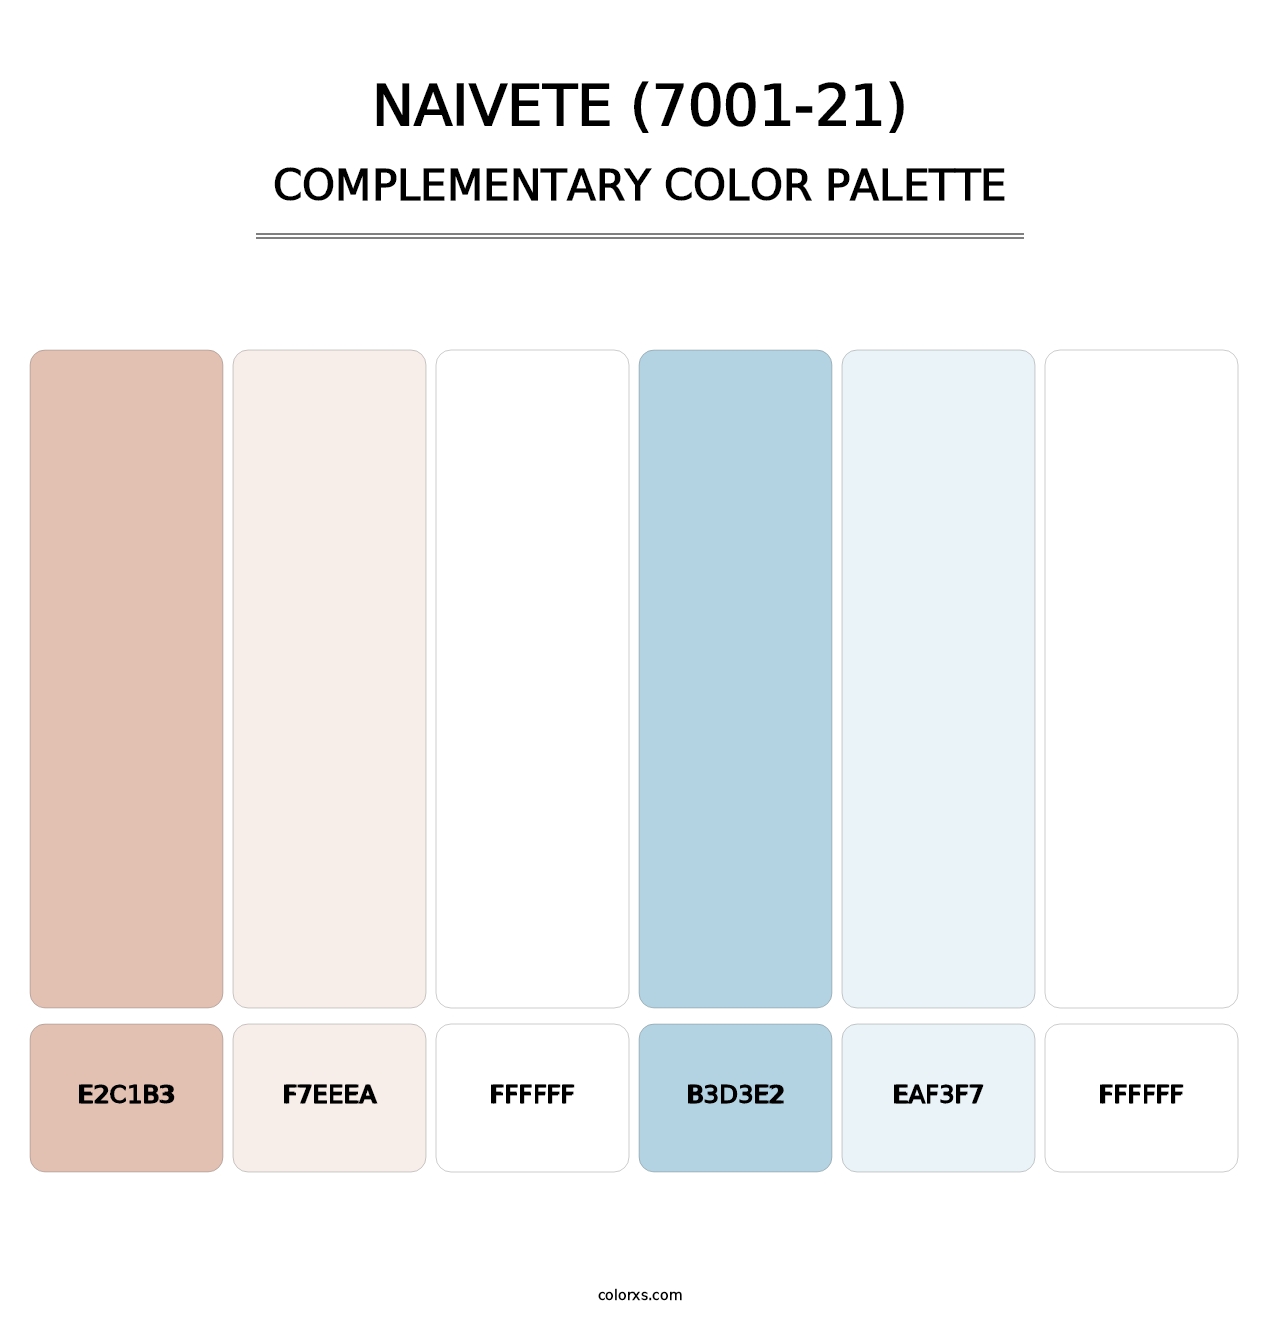 Naivete (7001-21) - Complementary Color Palette